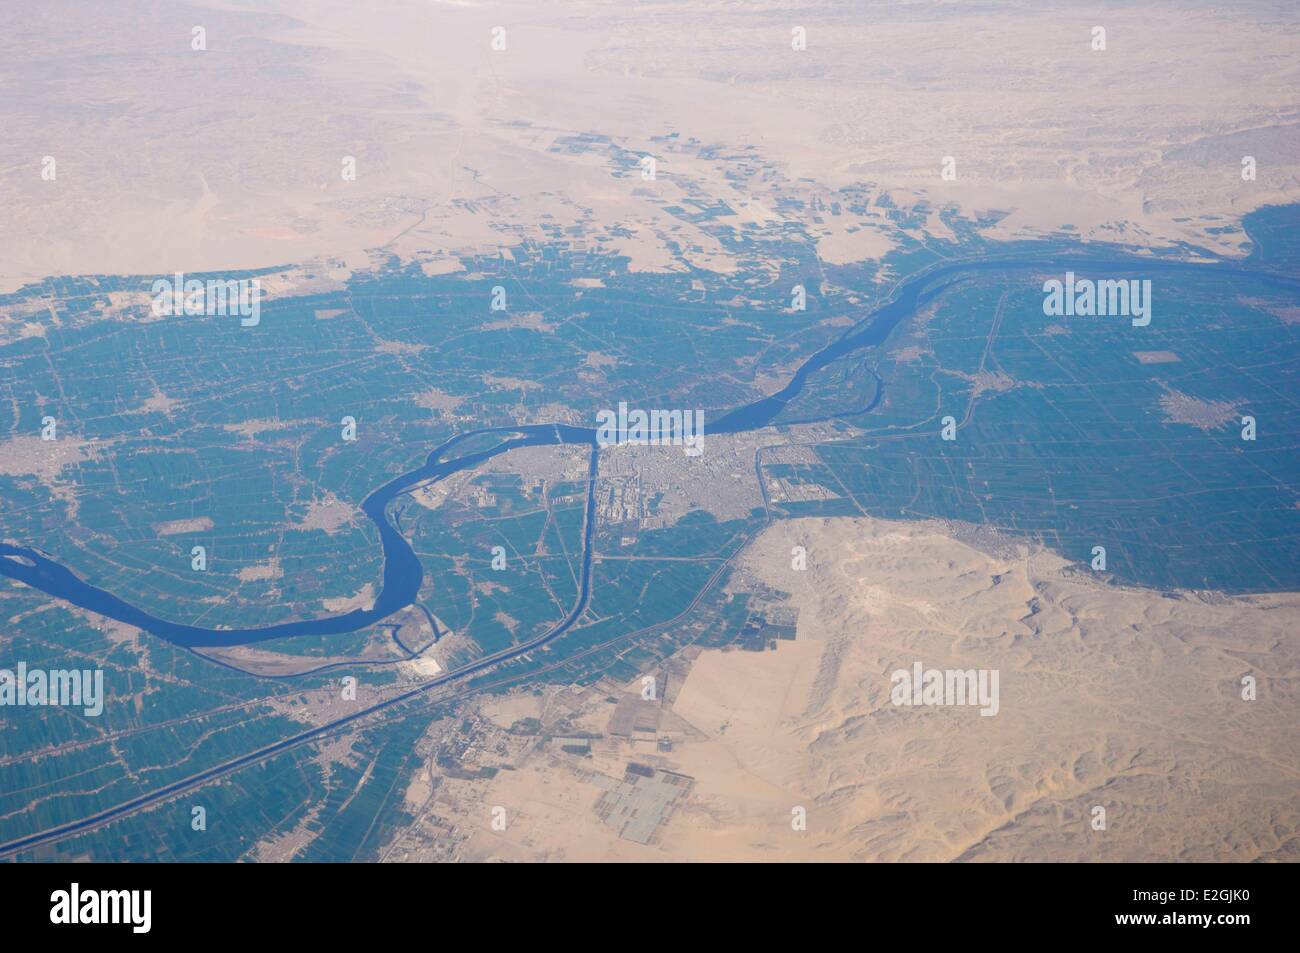 Egypt Upper Egypt Asyut valley of Nile and city of Assiut (aerial view) Stock Photo